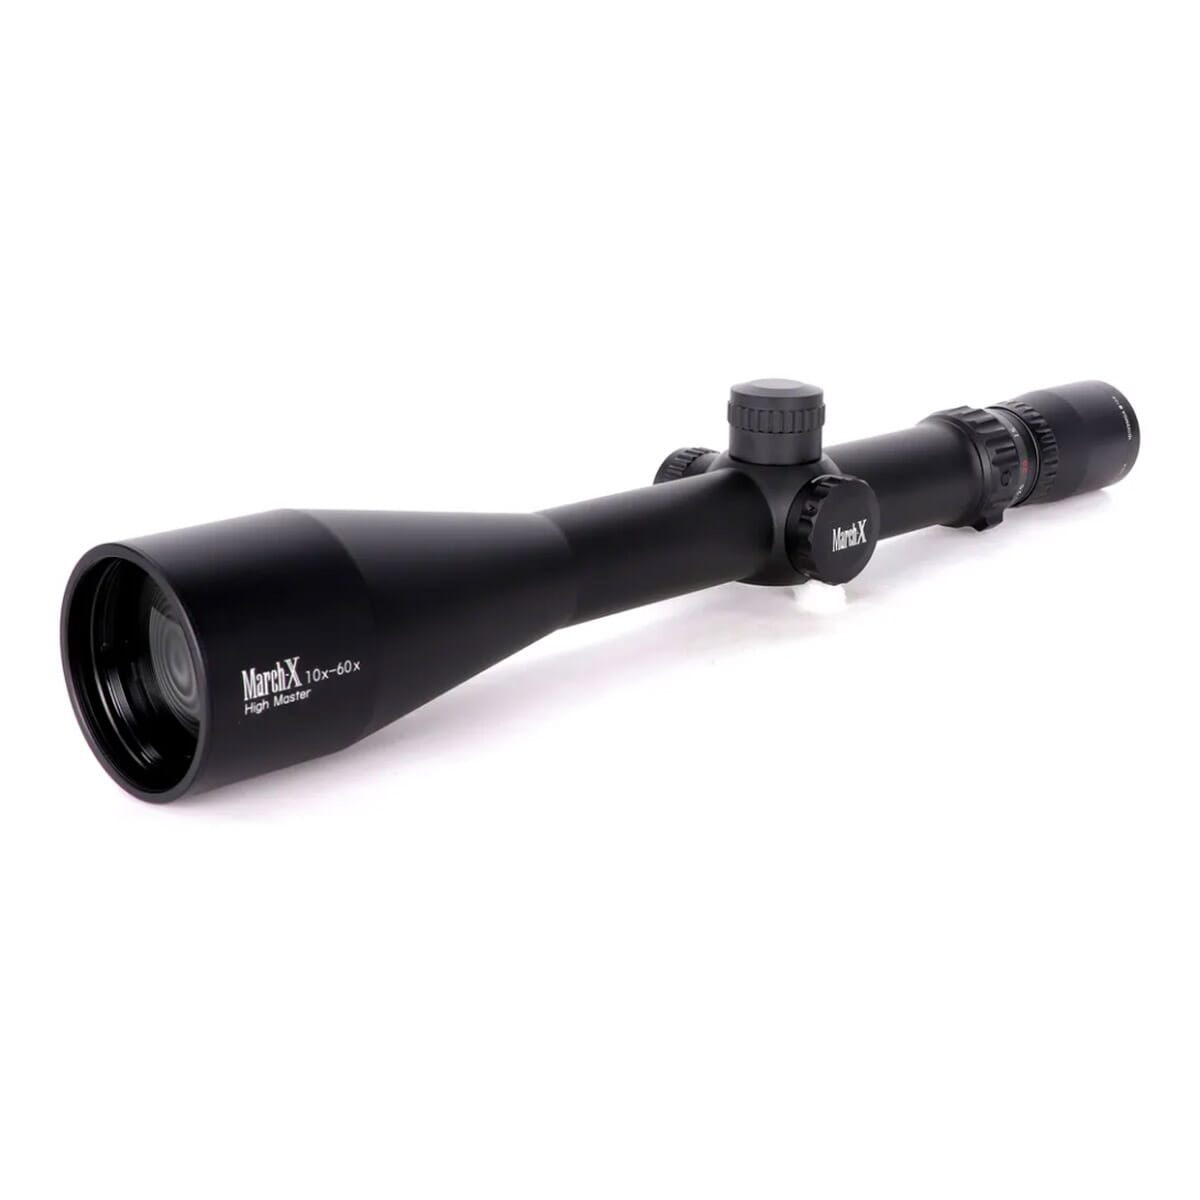 March High Master 10-60x56 MTR-1 Reticle 1/8 MOA Riflescope D60HV56LM-MTR-1